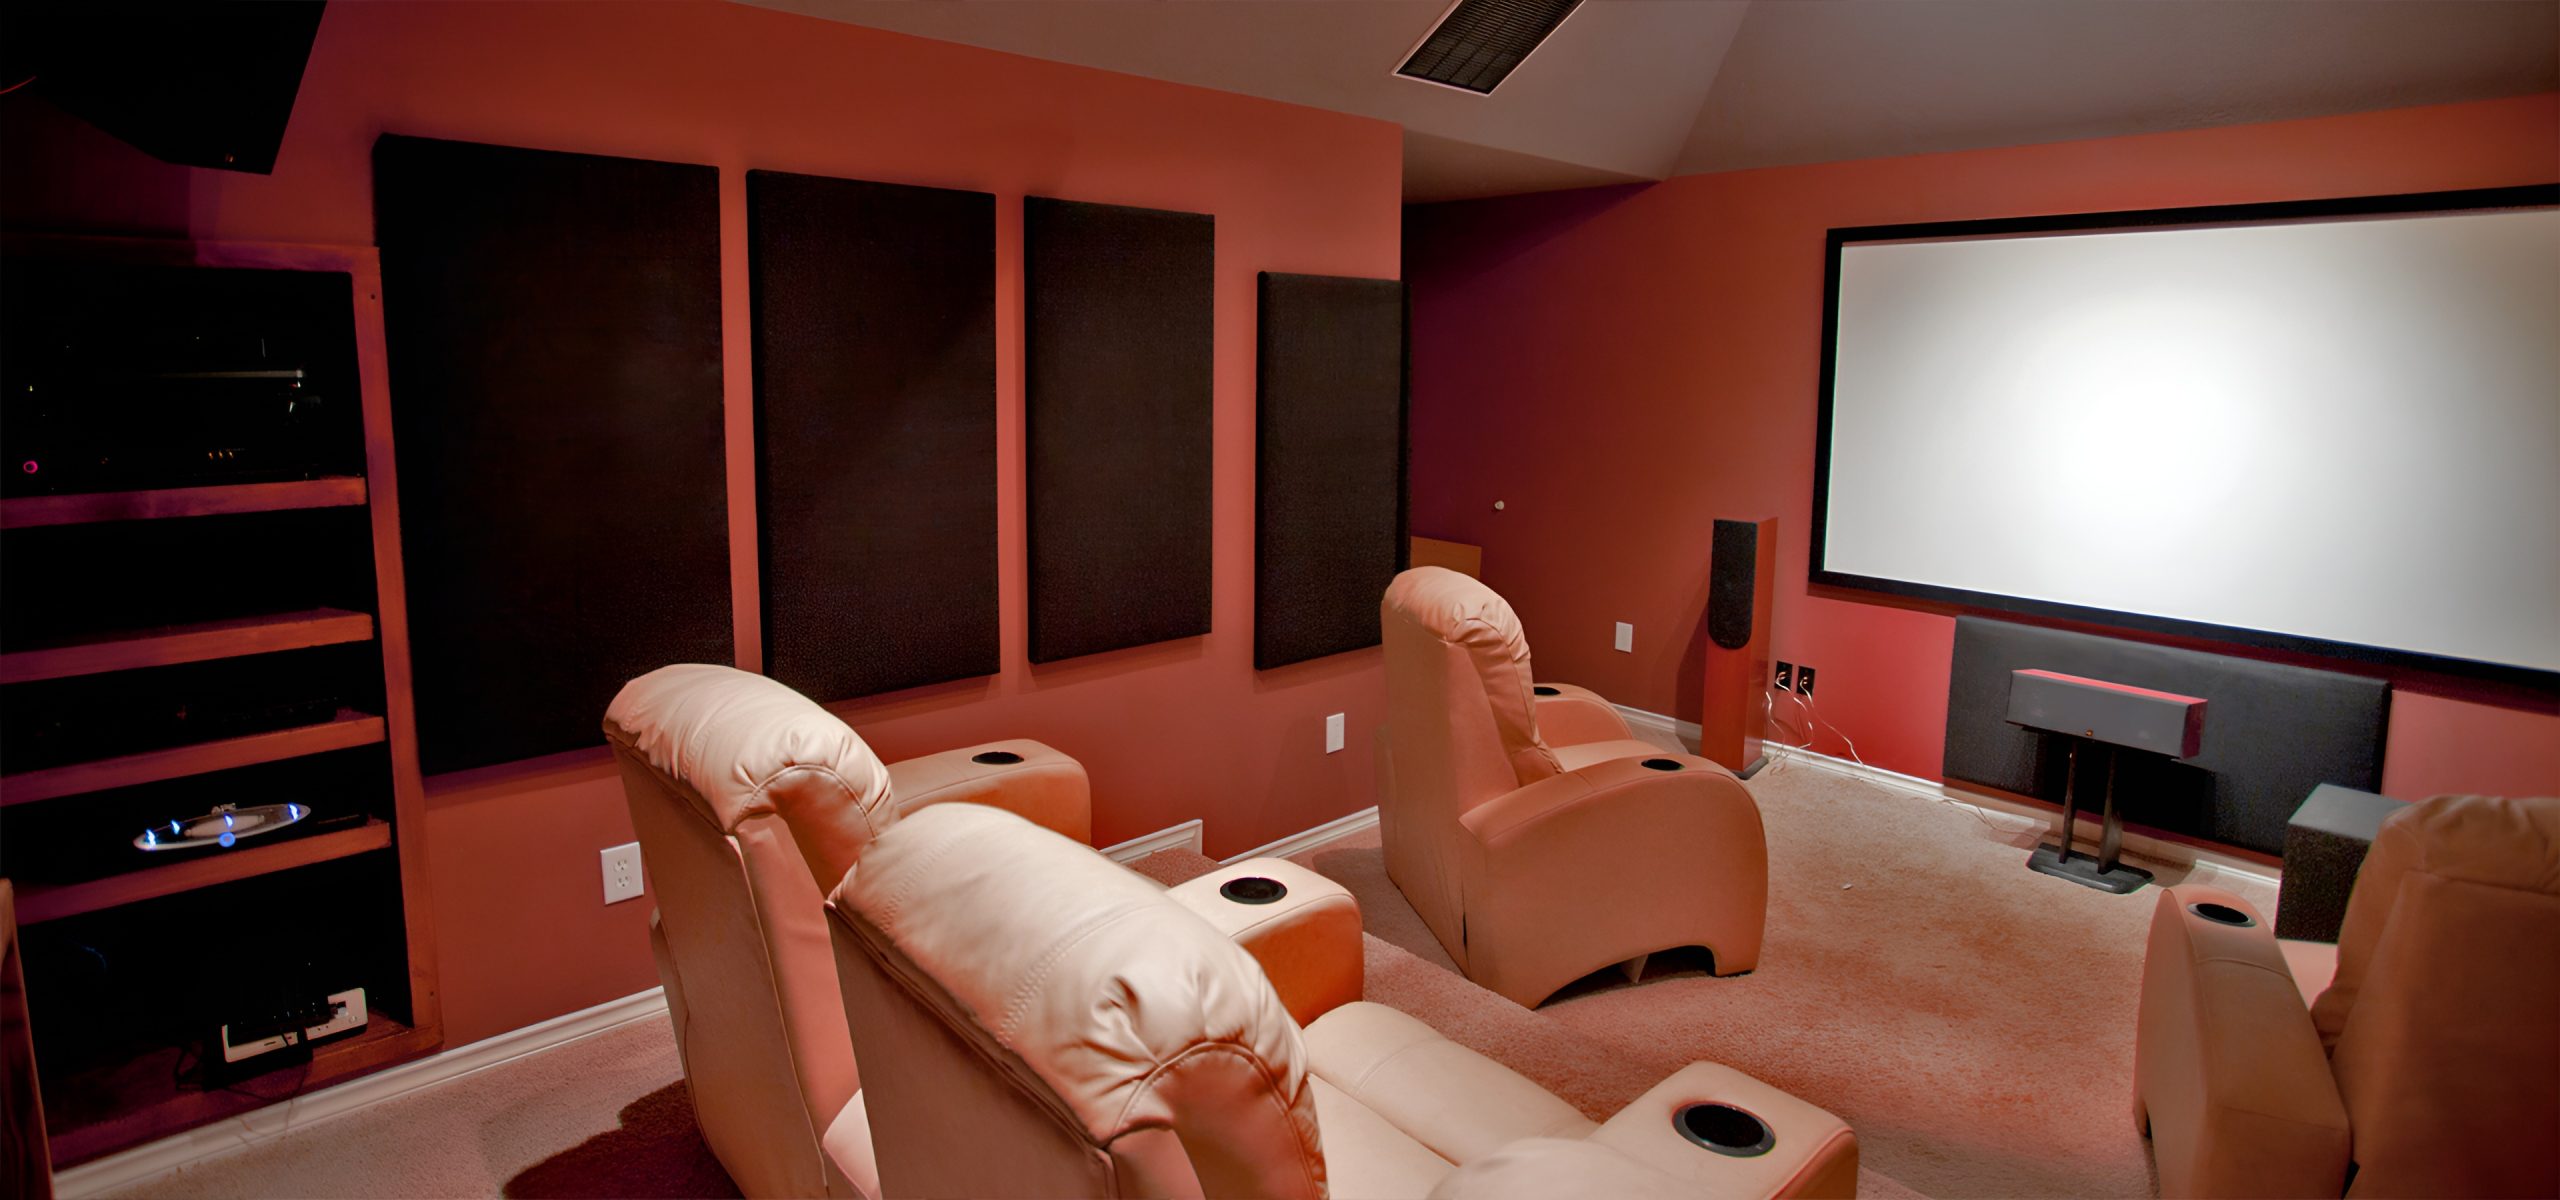 Home Theater Image